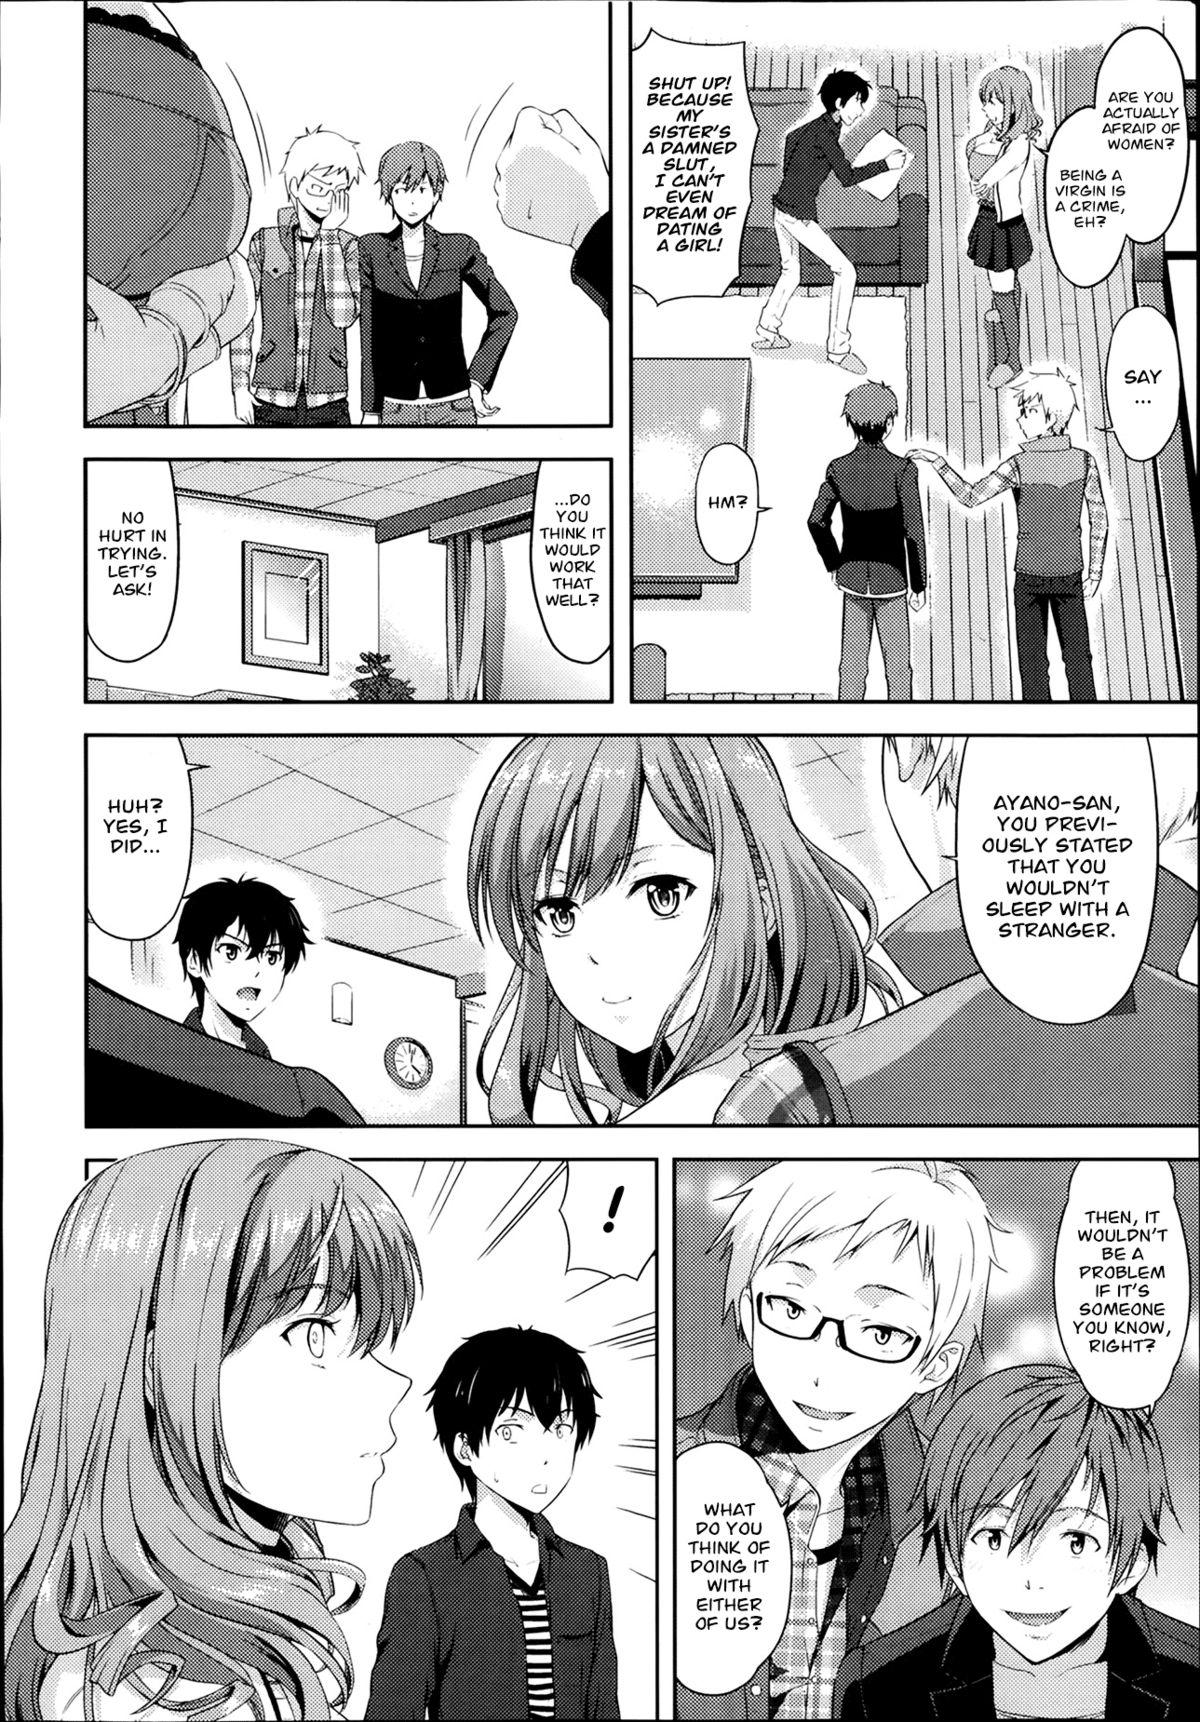 Beurette Transit + Otometic Overdrive Groupsex - Page 8